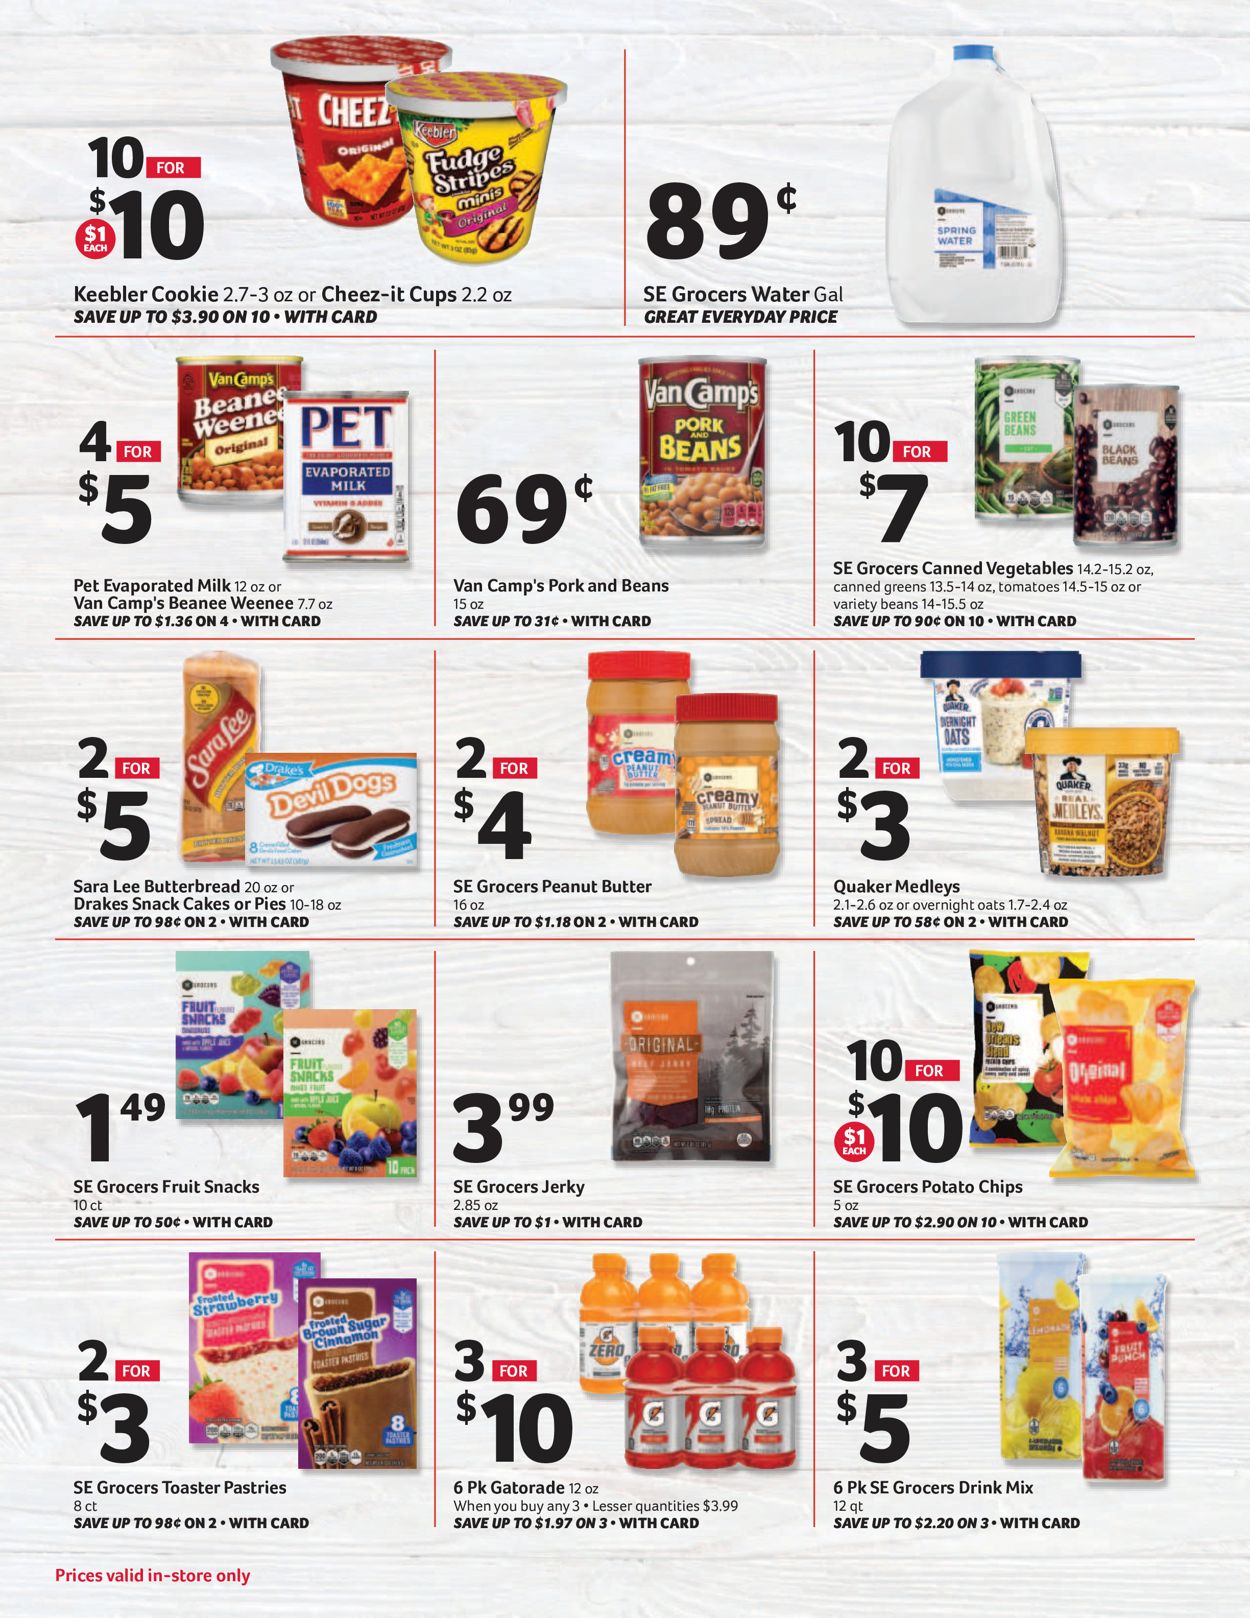 Catalogue BI-LO from 05/29/2019